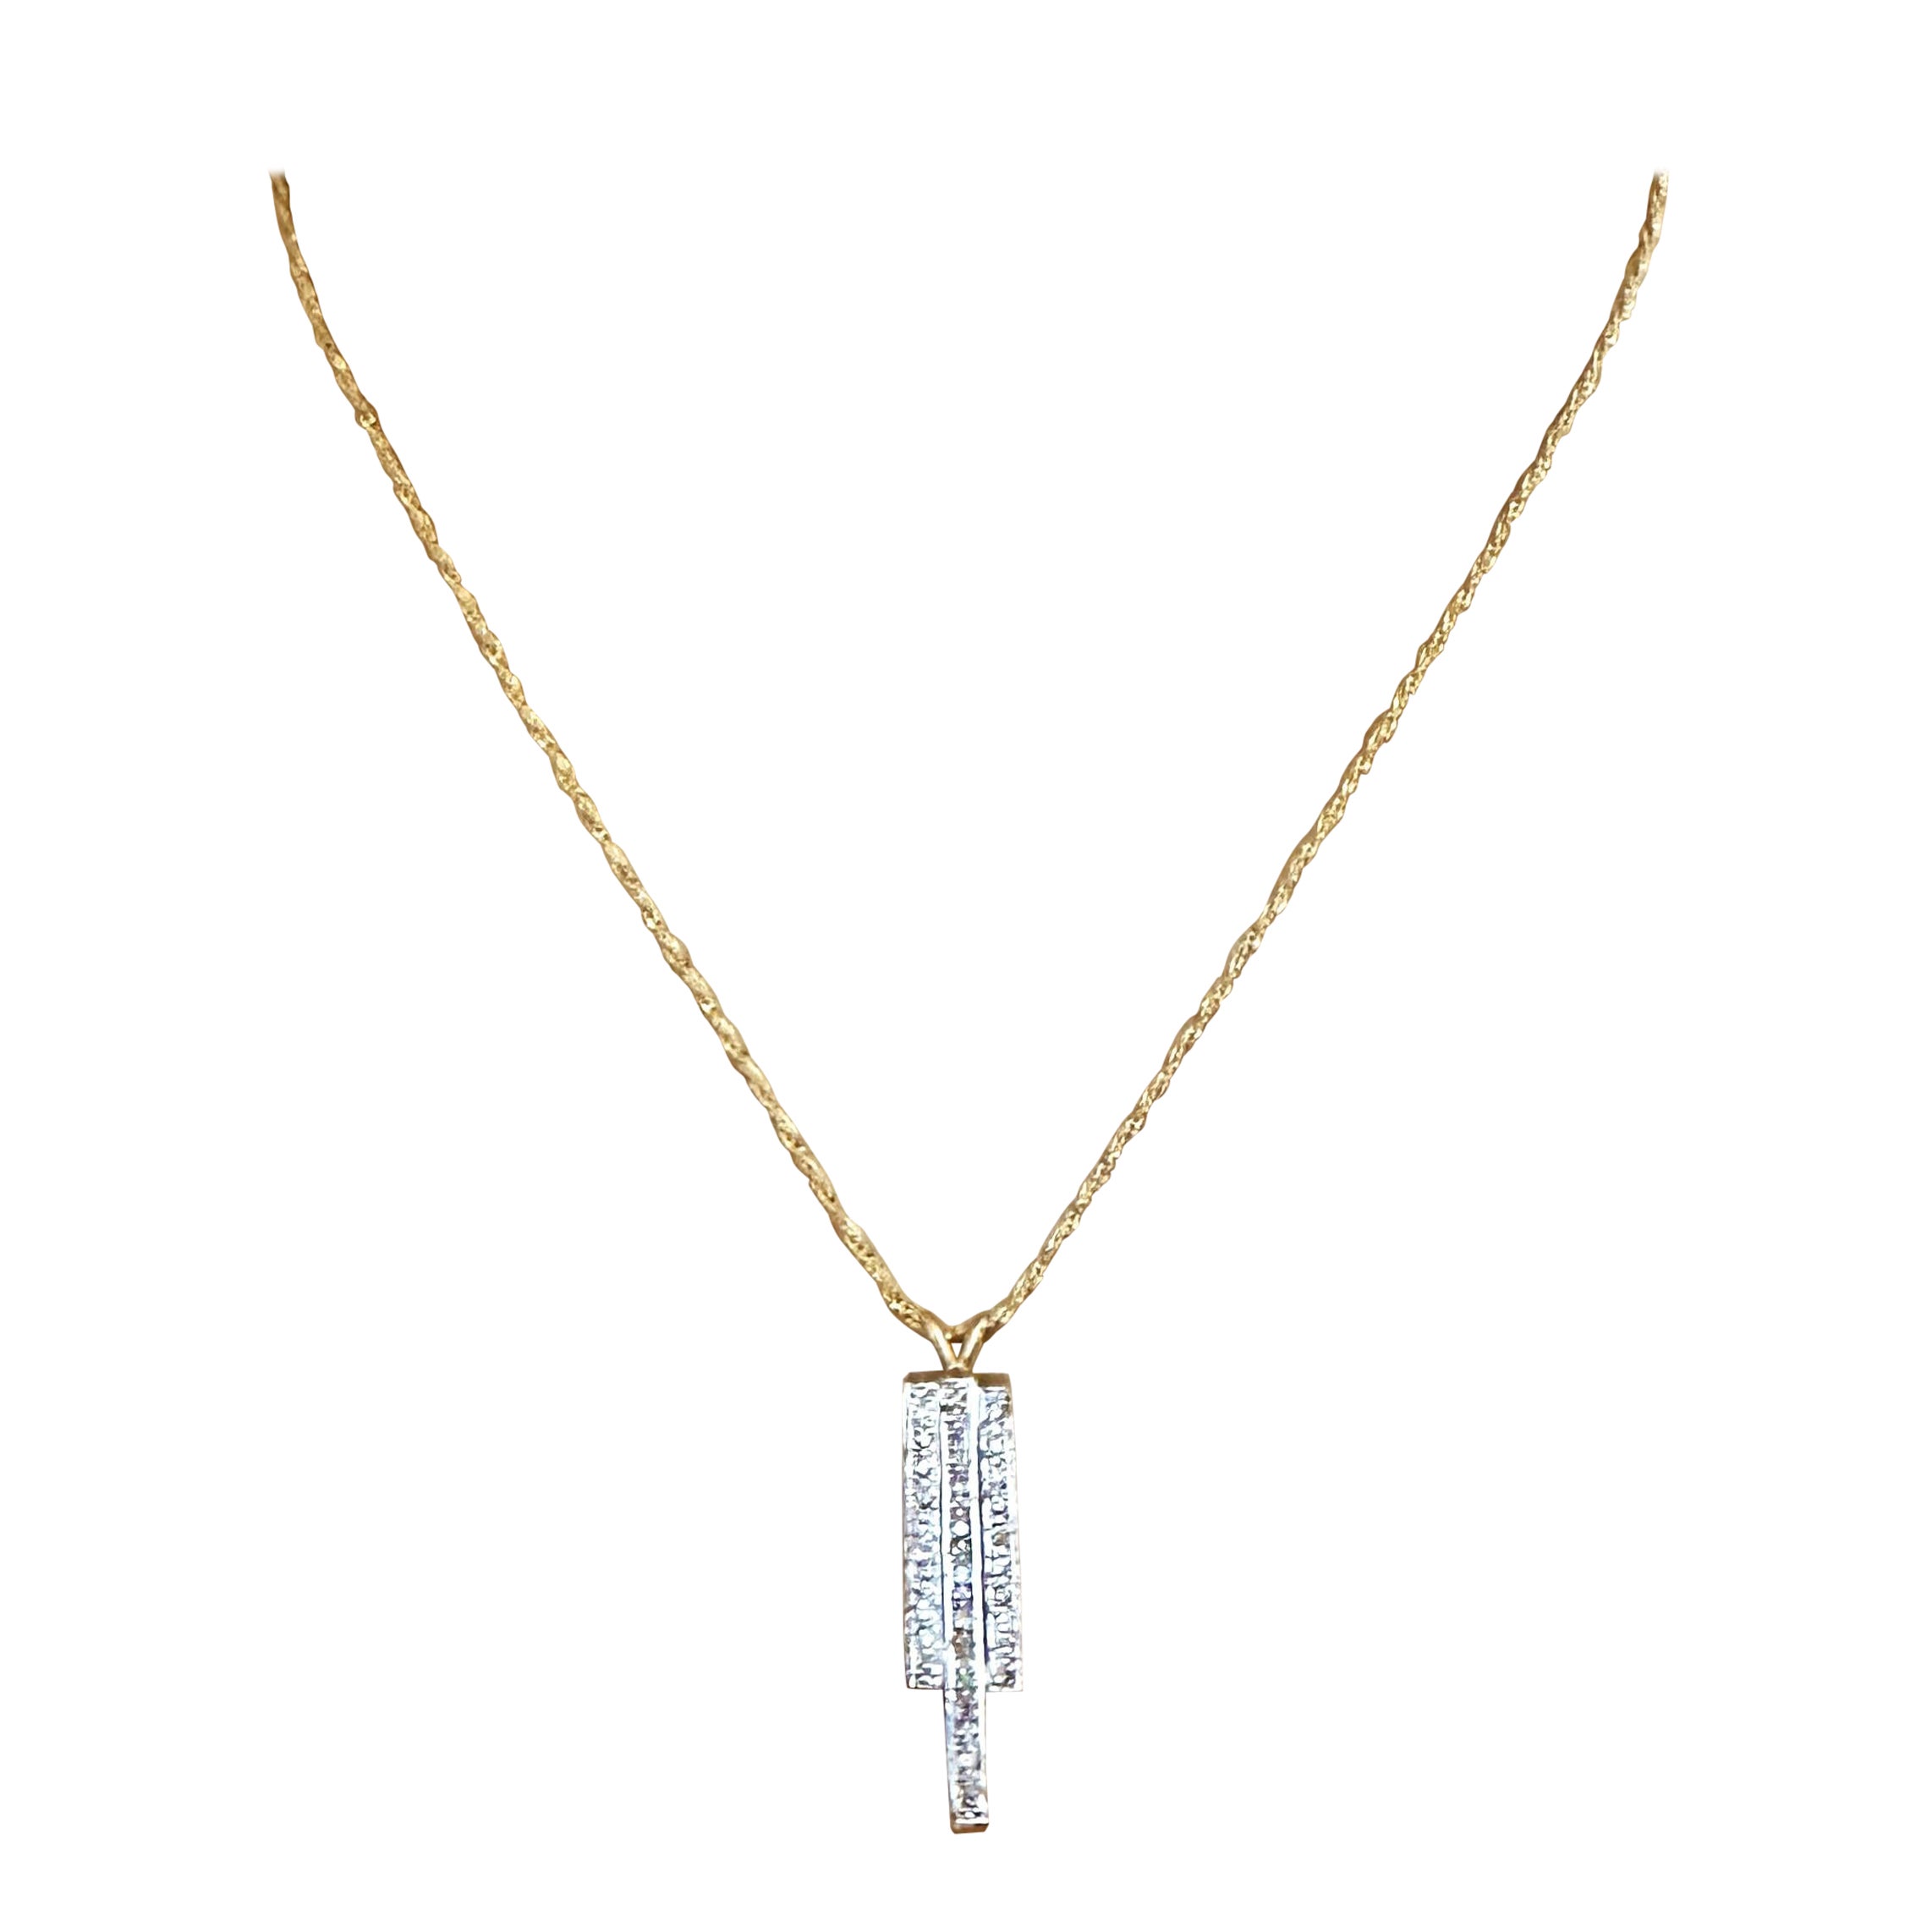 Italian Modern 14k Two Tone Gold 1.25 ct Diamond Necklace with Appraisal